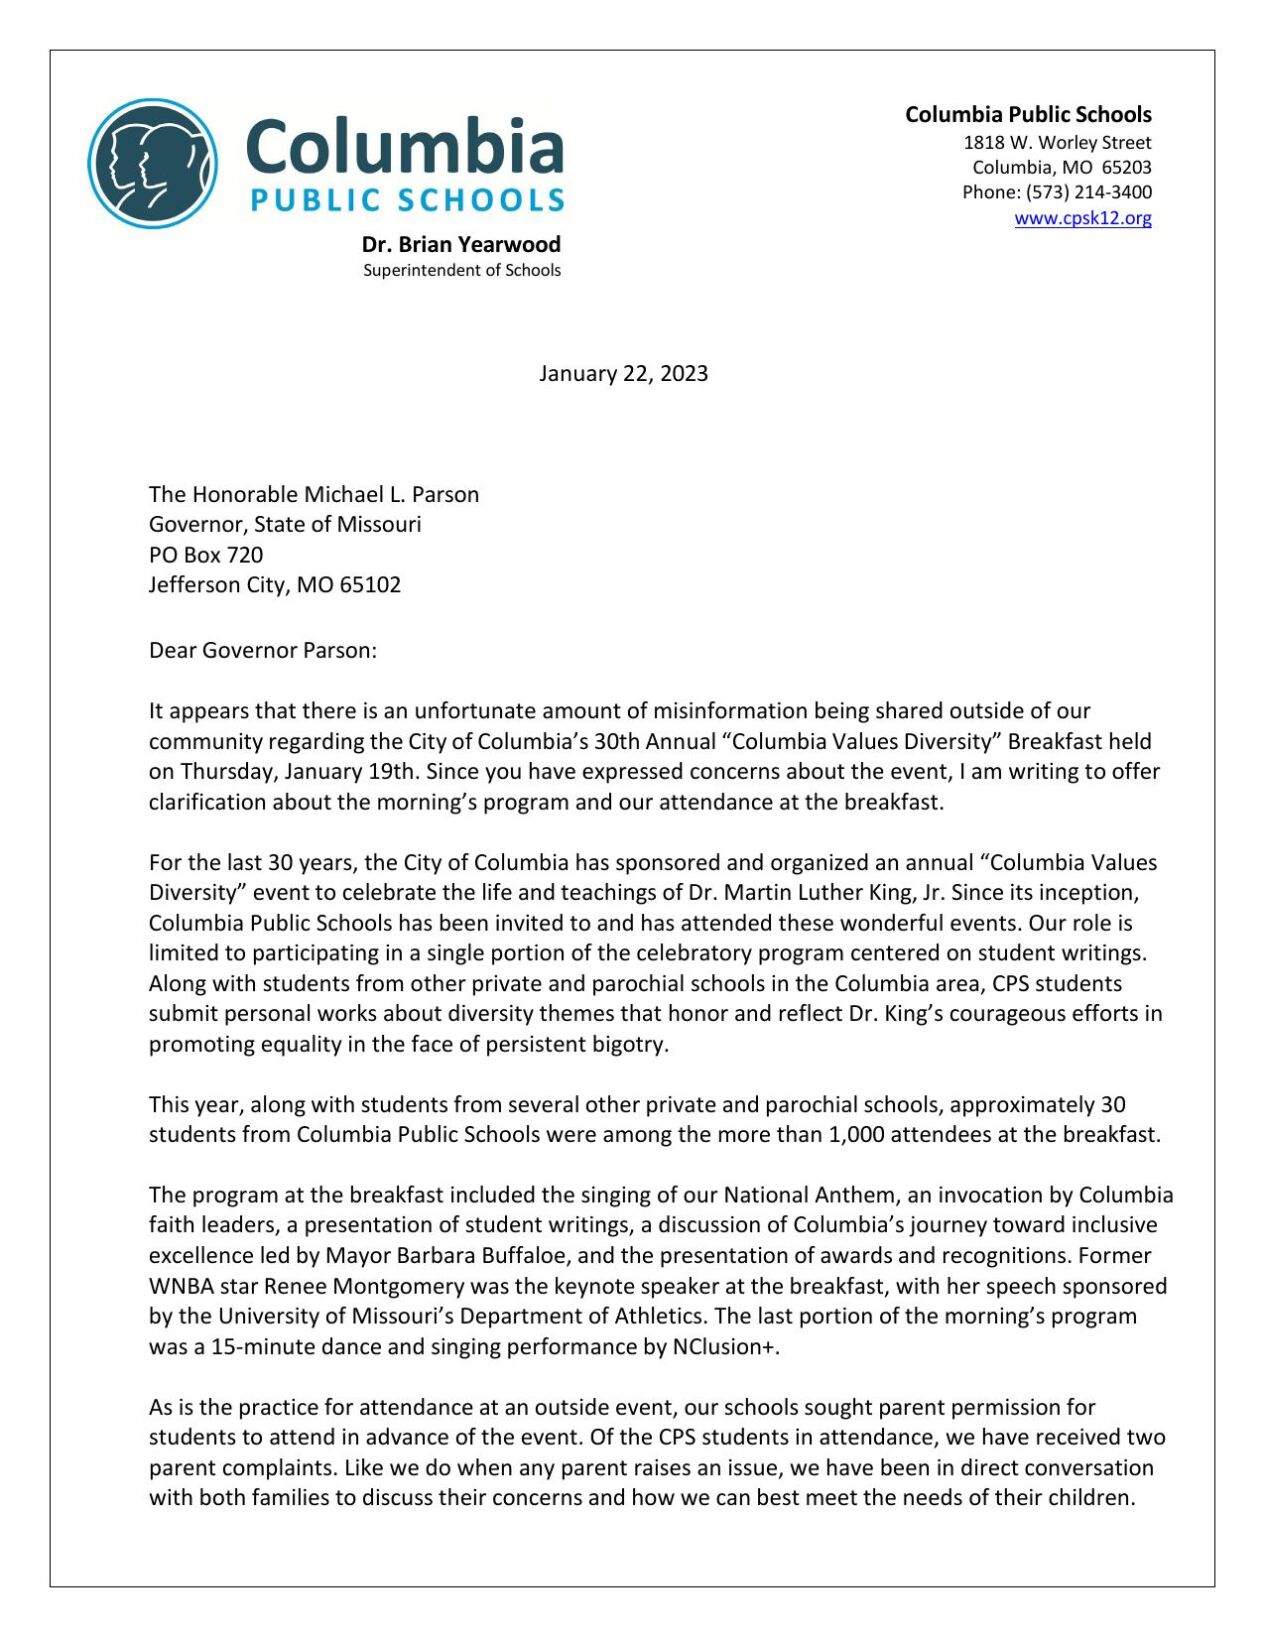 Superintendent Yearwood's letter to Gov. Parson